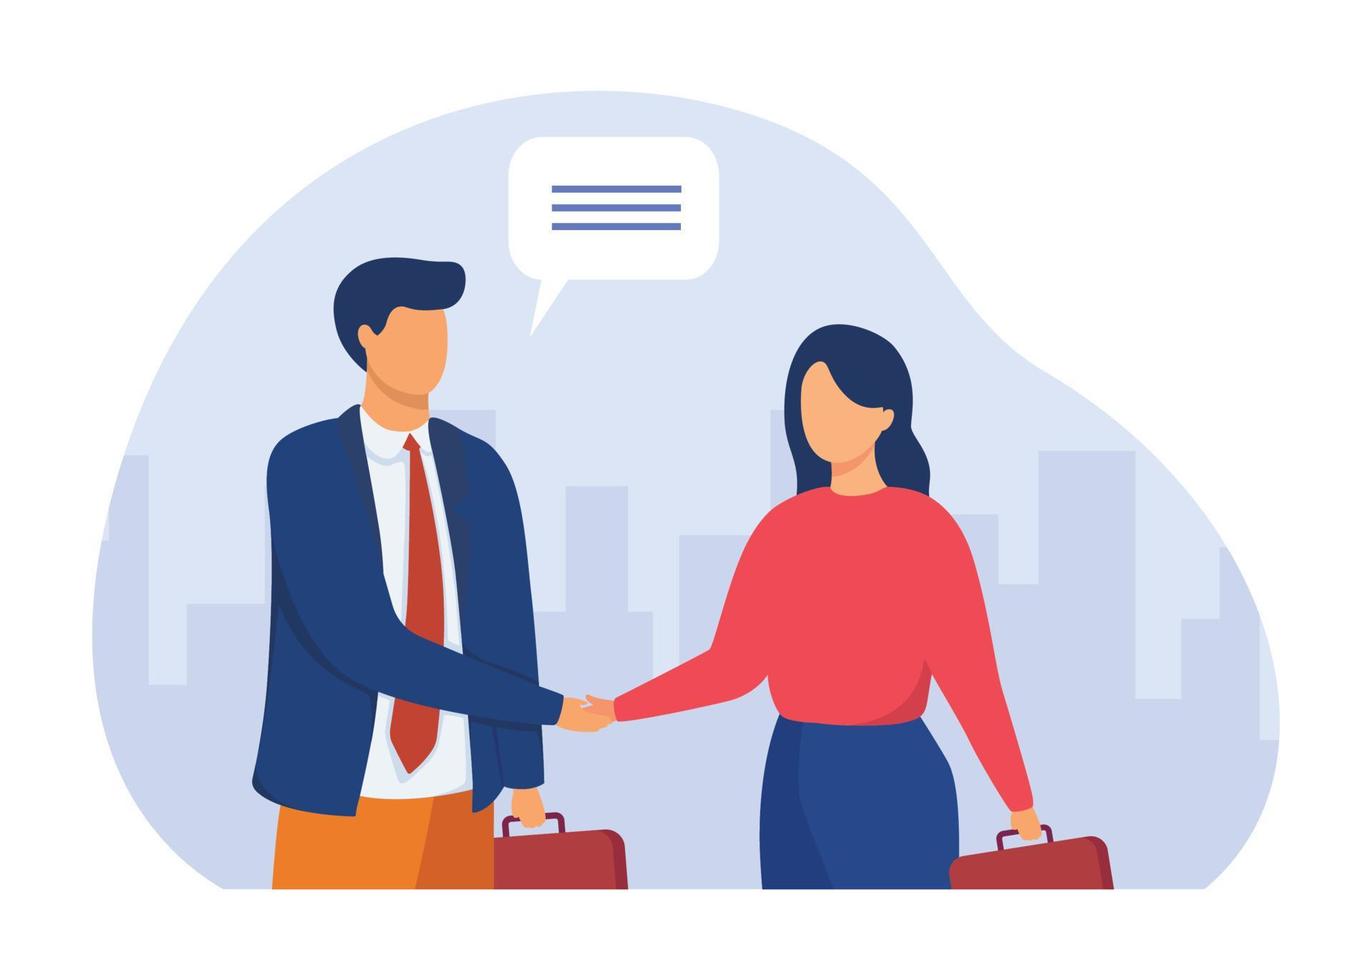 Man and woman shaking hand. Business partners saying hello or closing deal. Hiring and cooperation concept. Vector illustration. Basic RGB